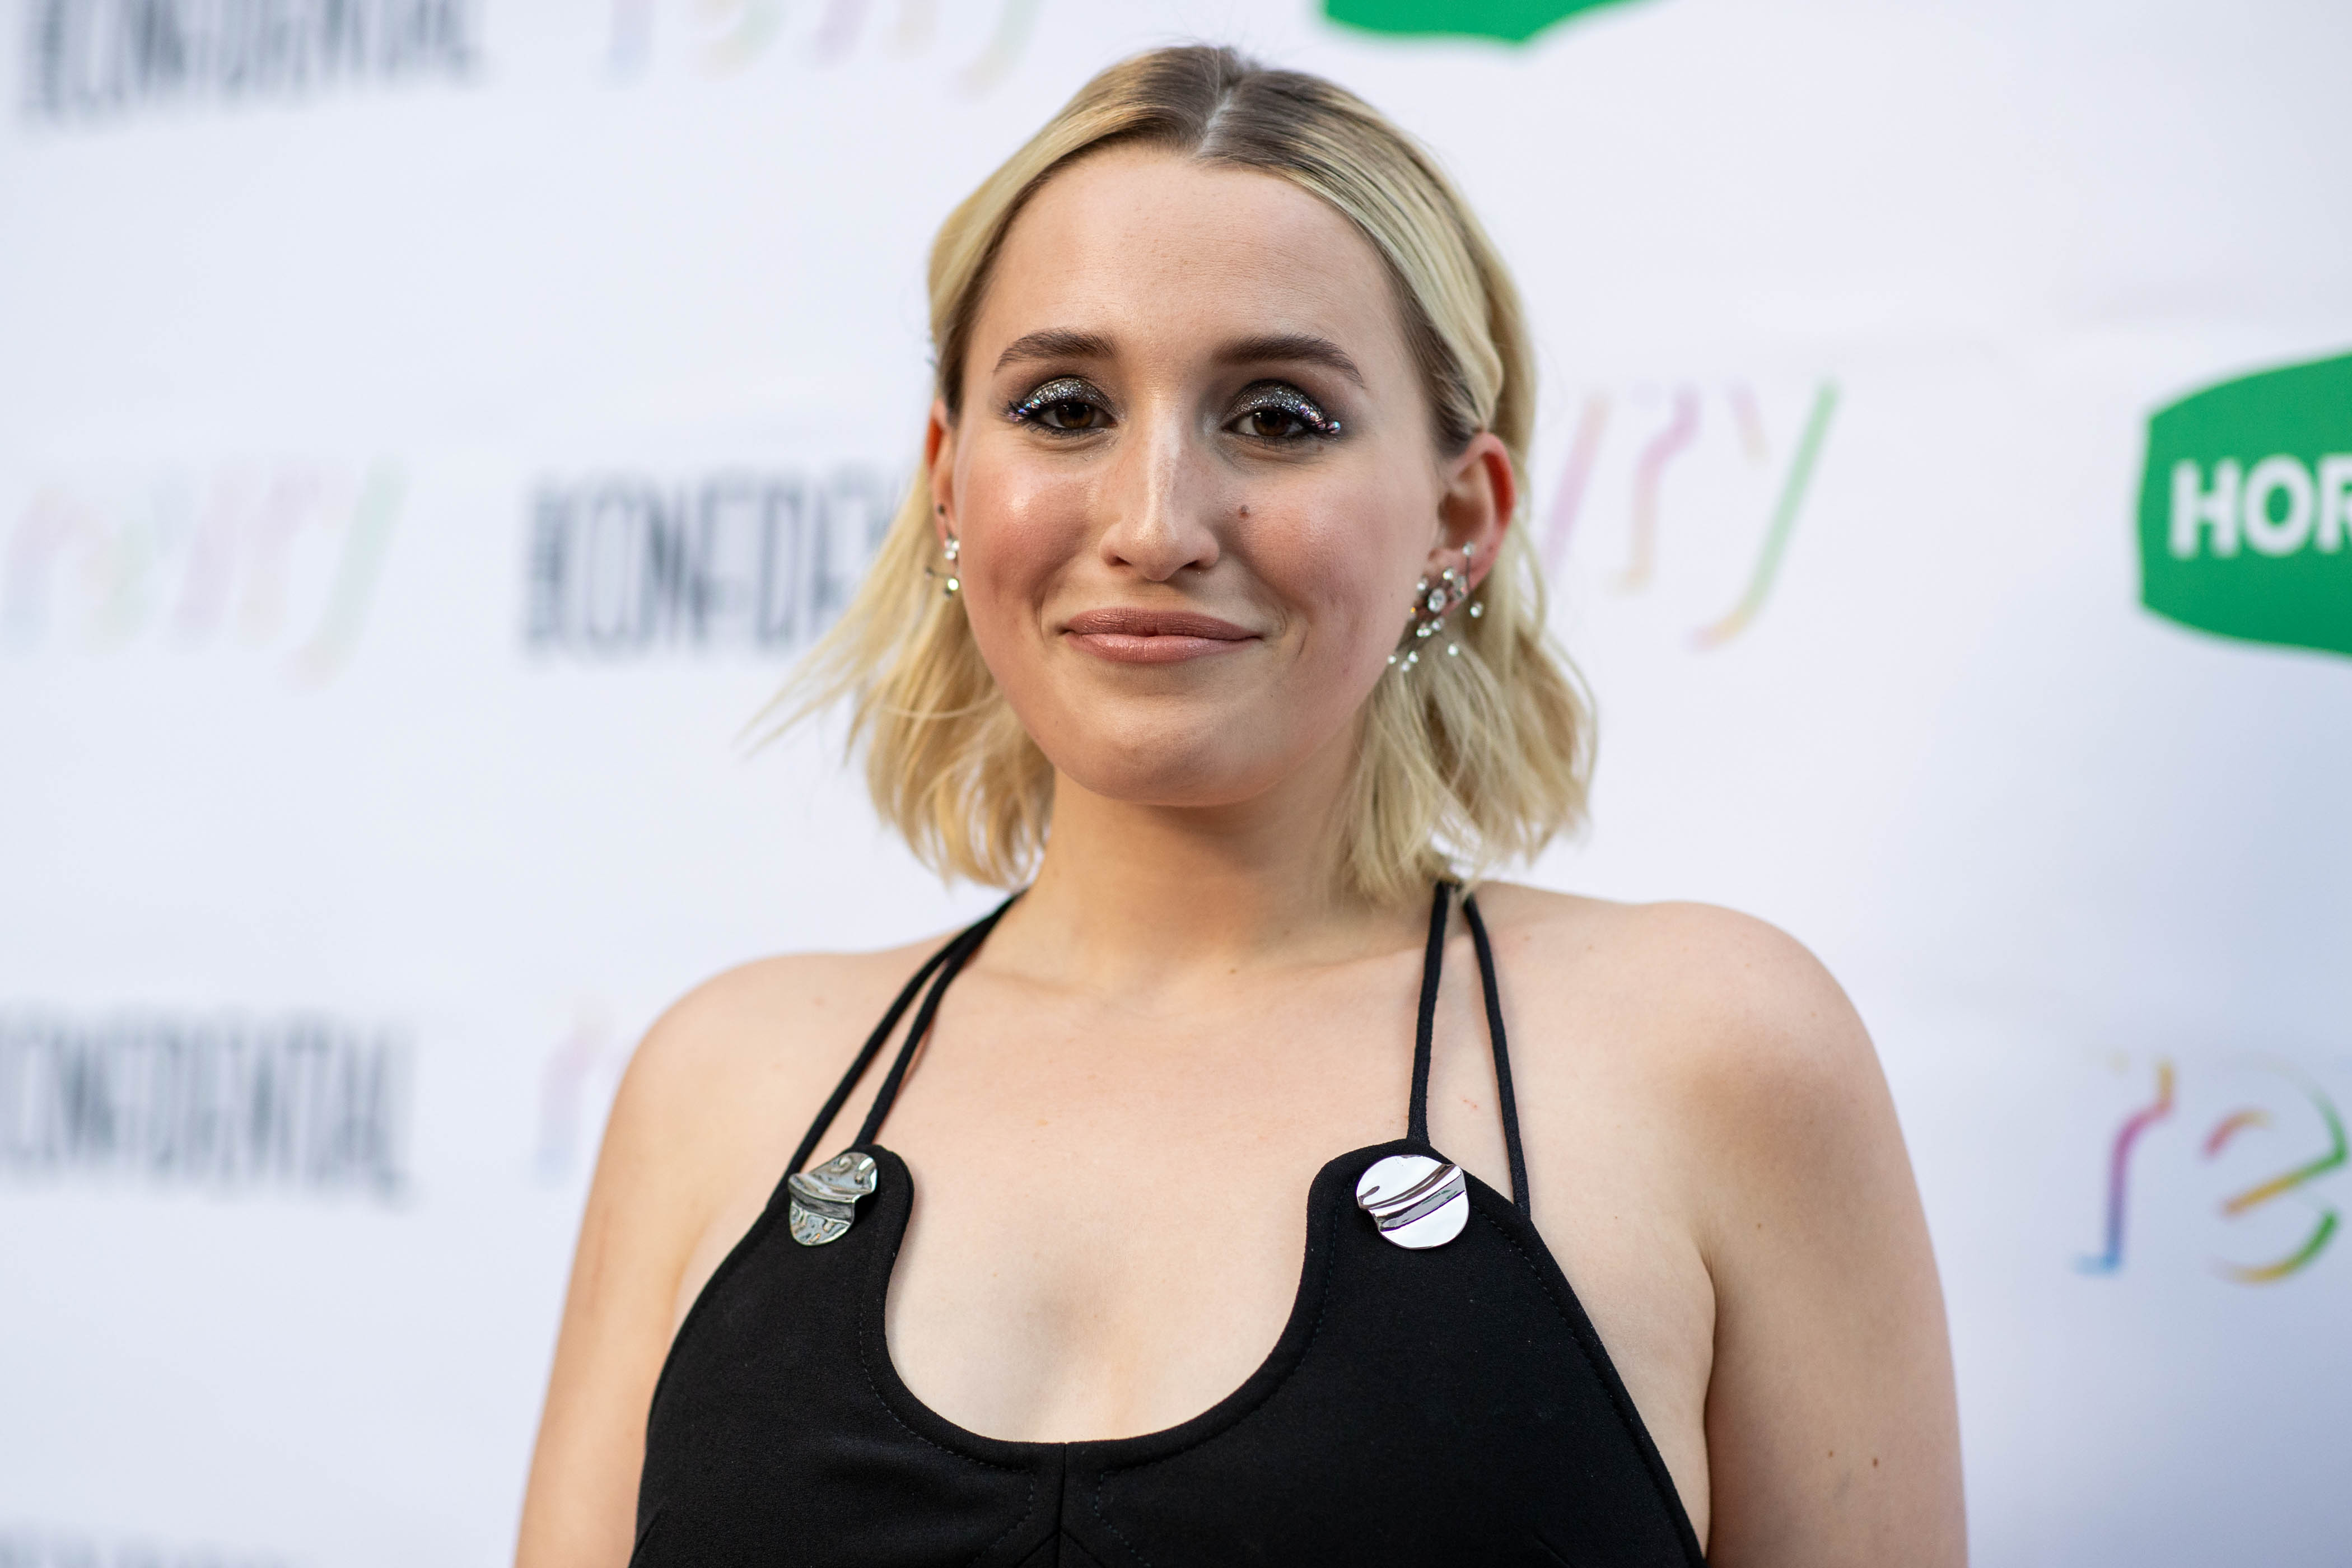 Harley Quinn Smith. Daughter of famous filmmaker, Kevin Smith.